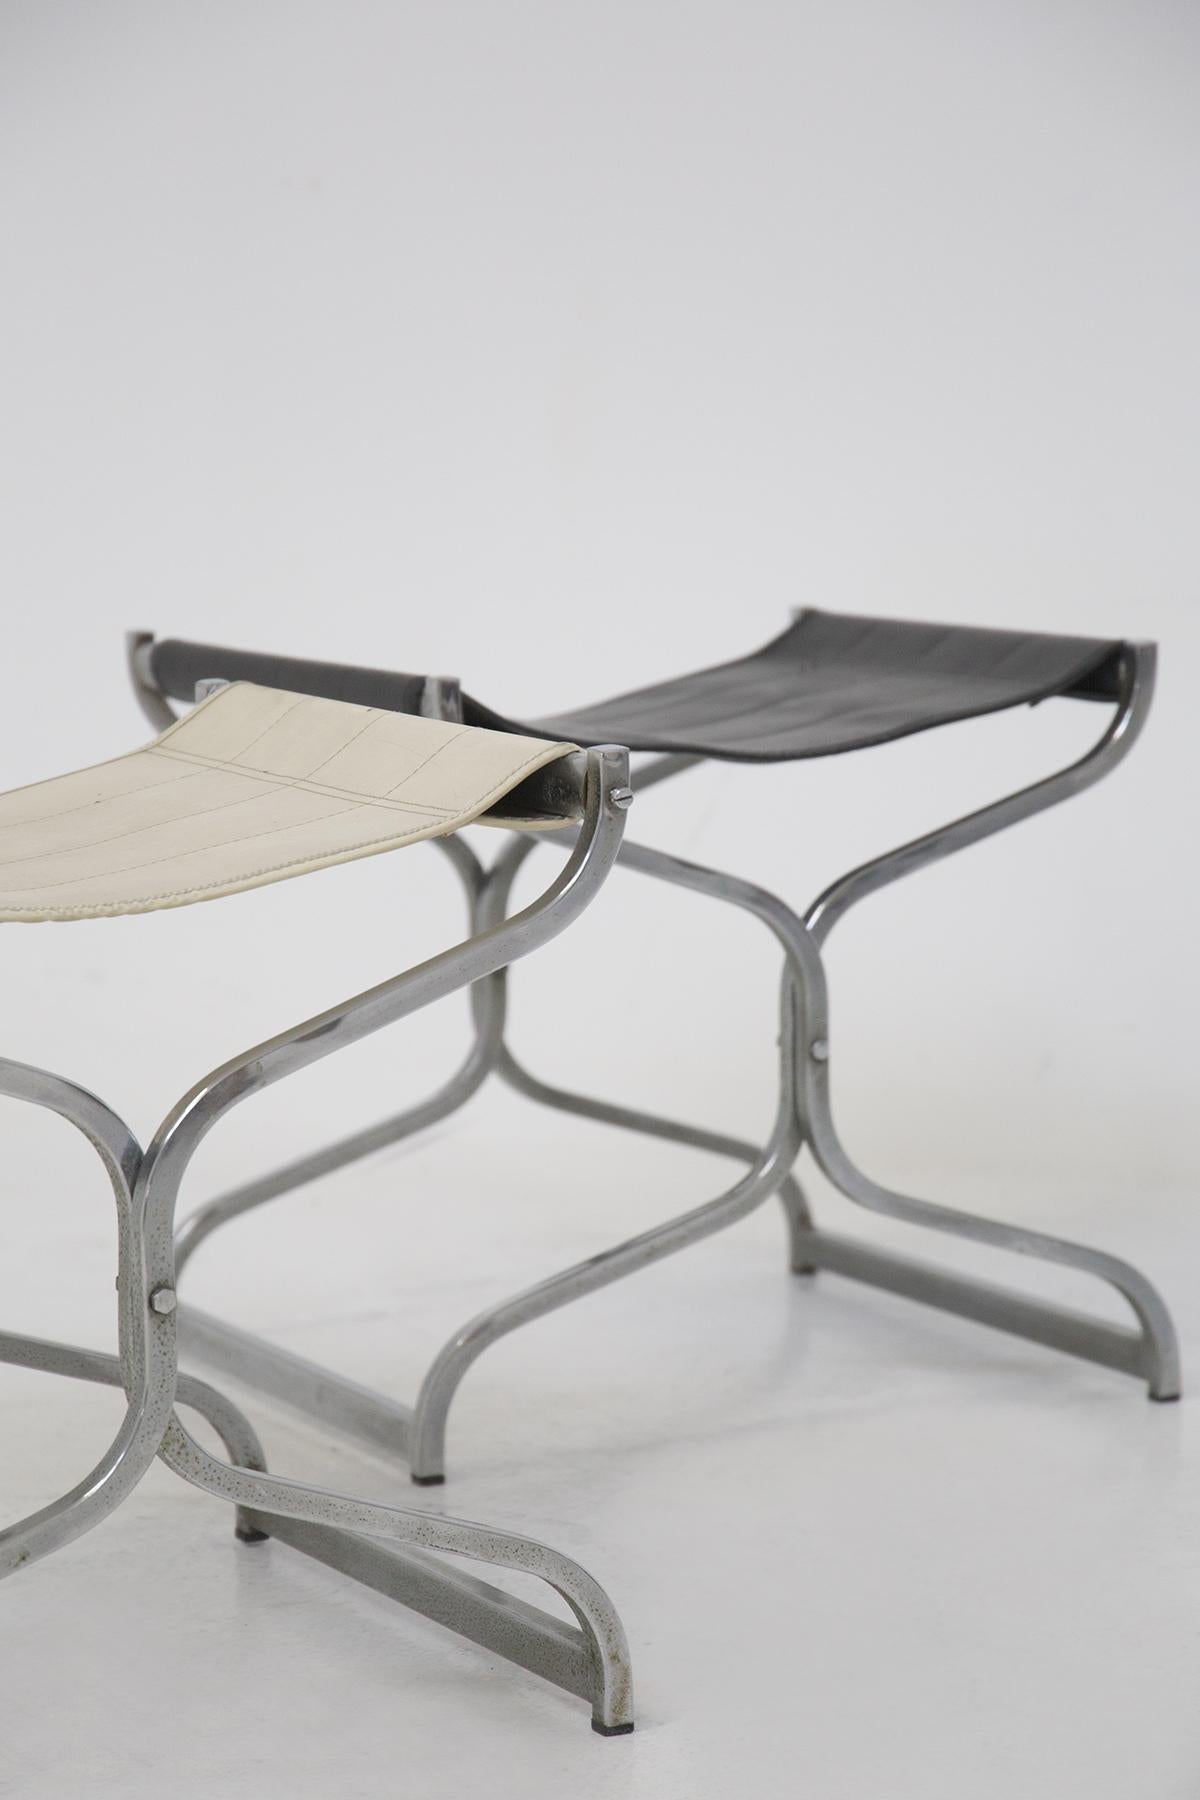 Vintage Leather Stools by Caccia Dominioni and Introini for Vips Residence 1